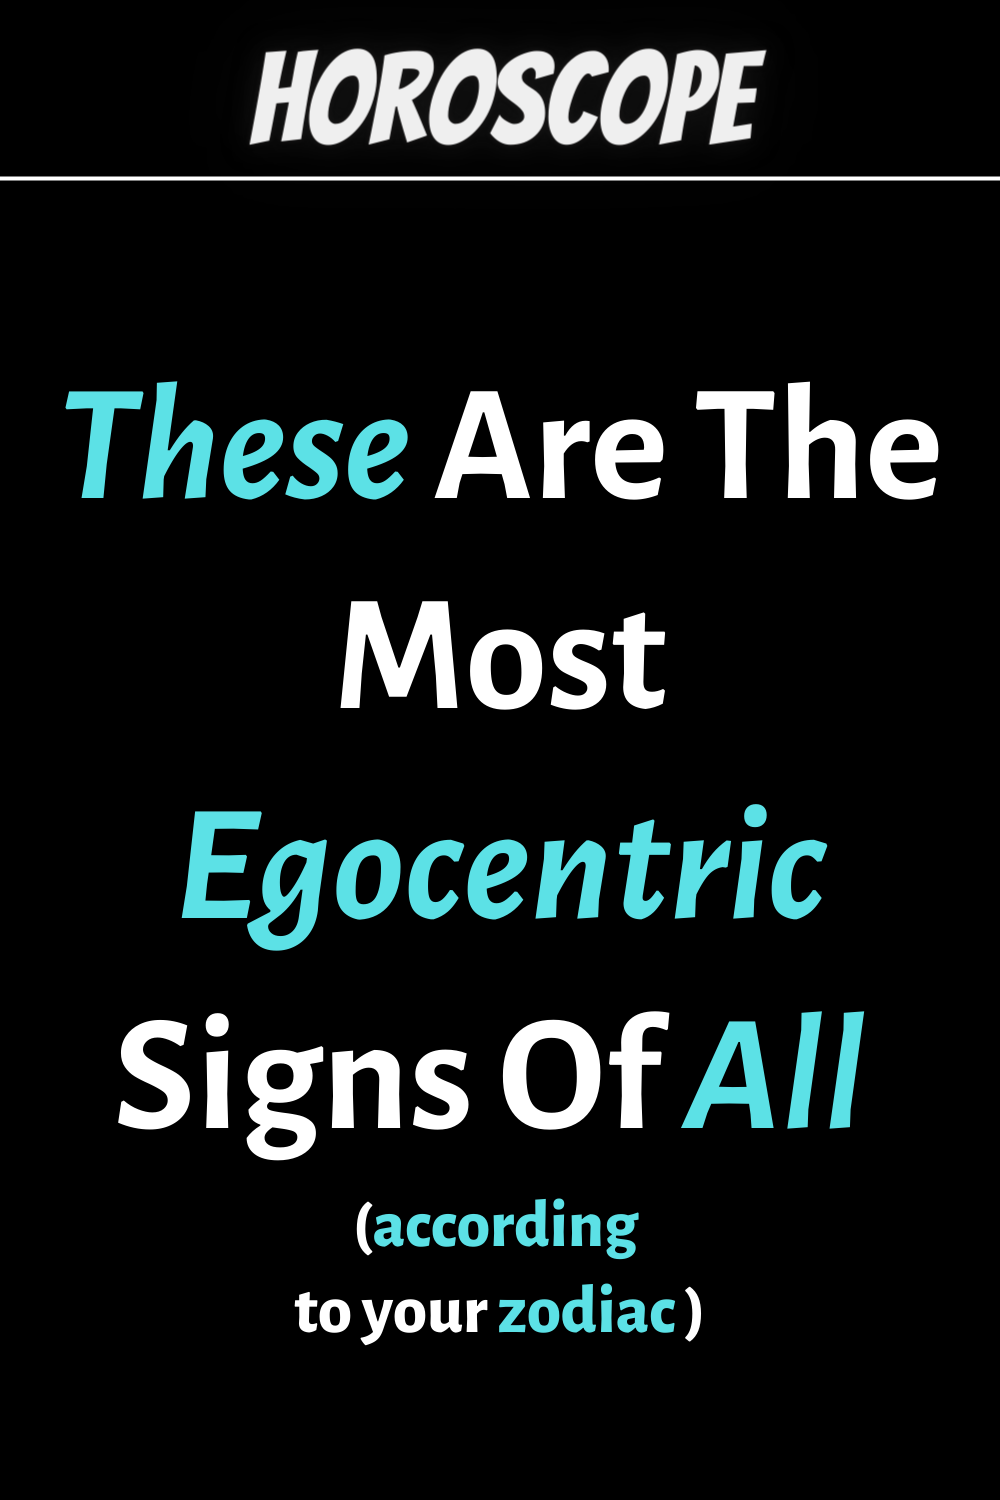 These Are The Most Egocentric Signs